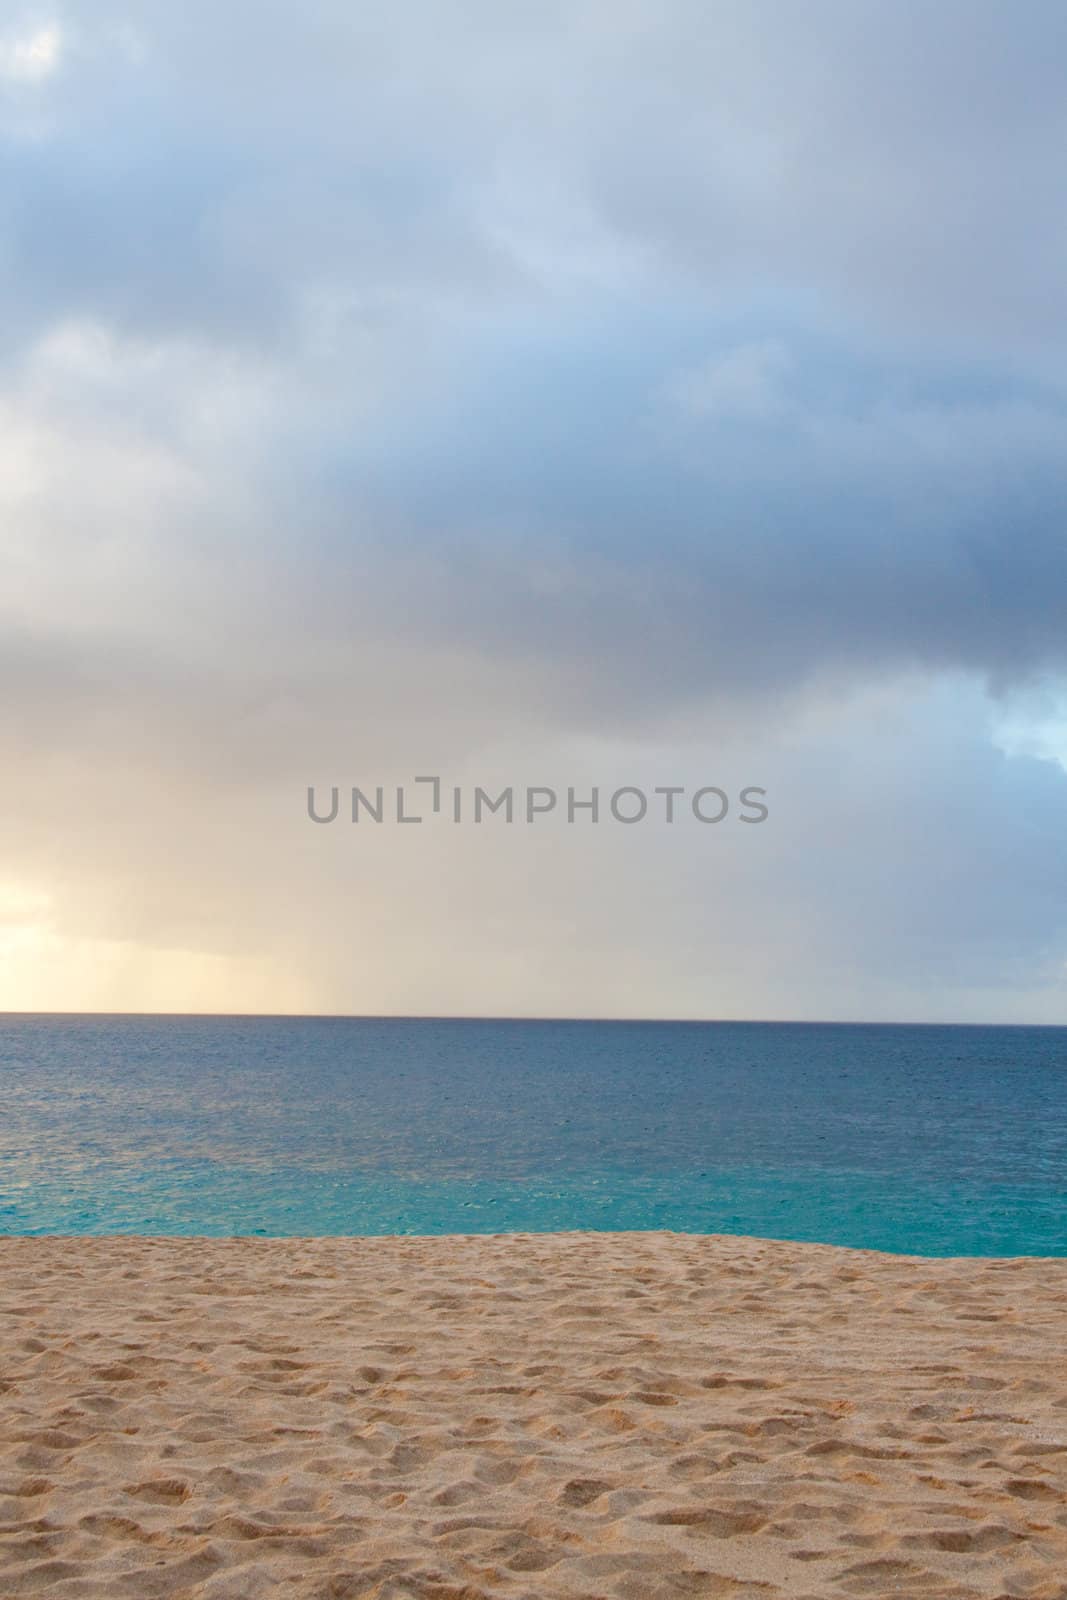 A beautiful beach with nobody in the scene as well as a dynamic sky and nice turquoise and blue tones throughout in color.